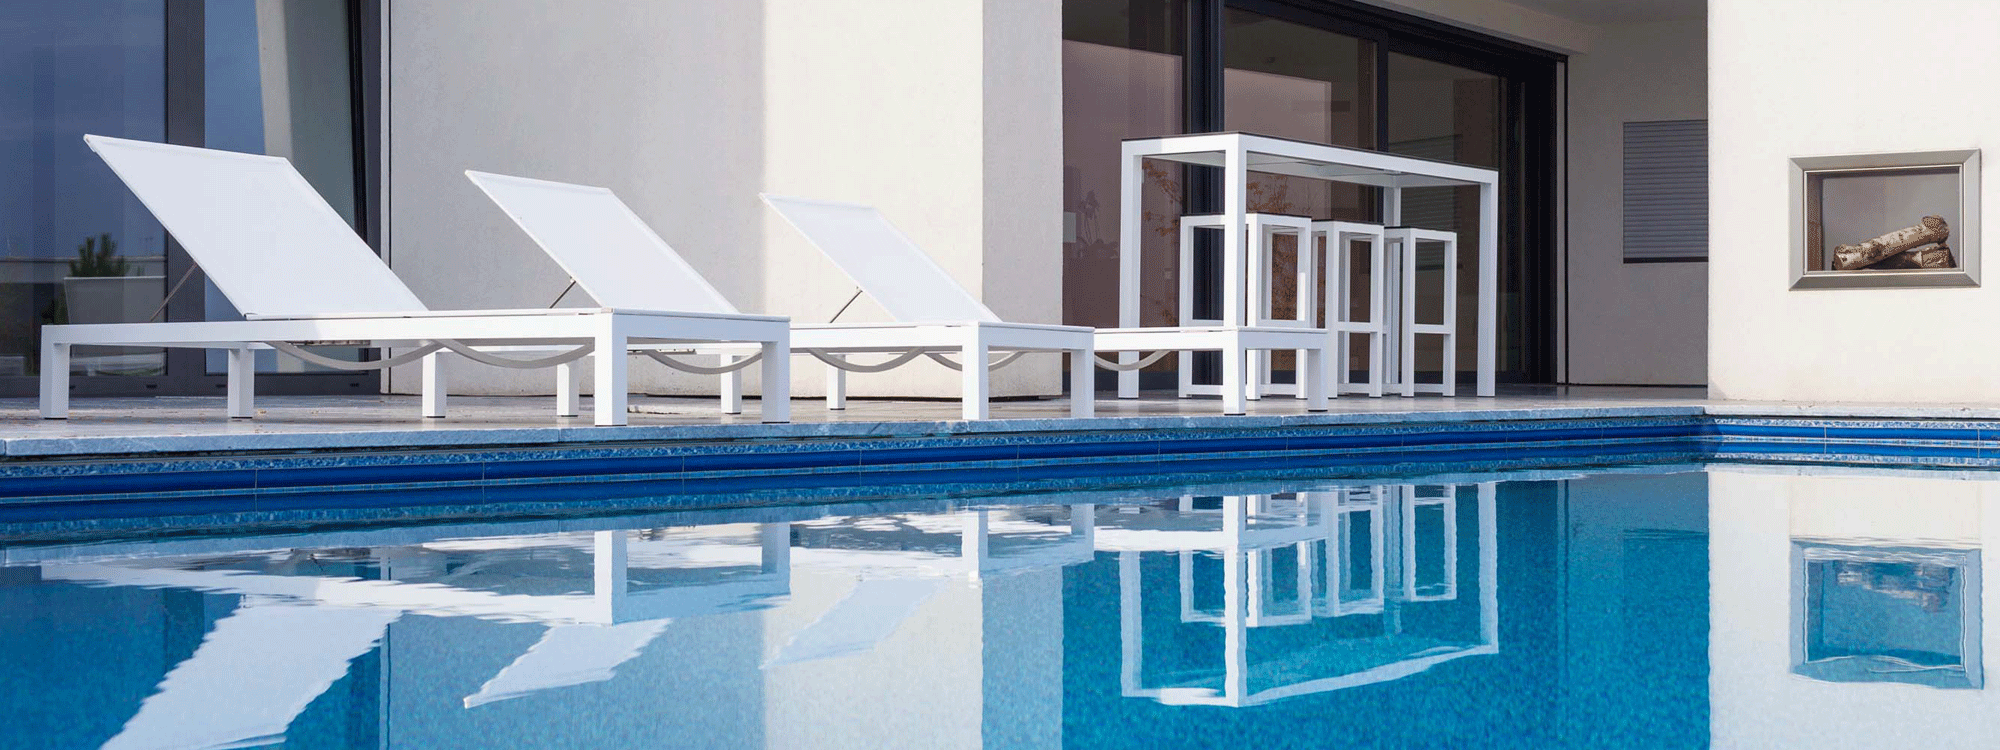 Image of Leuven white sun loungers and white bar furniture on chic poolside with furniture’s reflection shown in the water